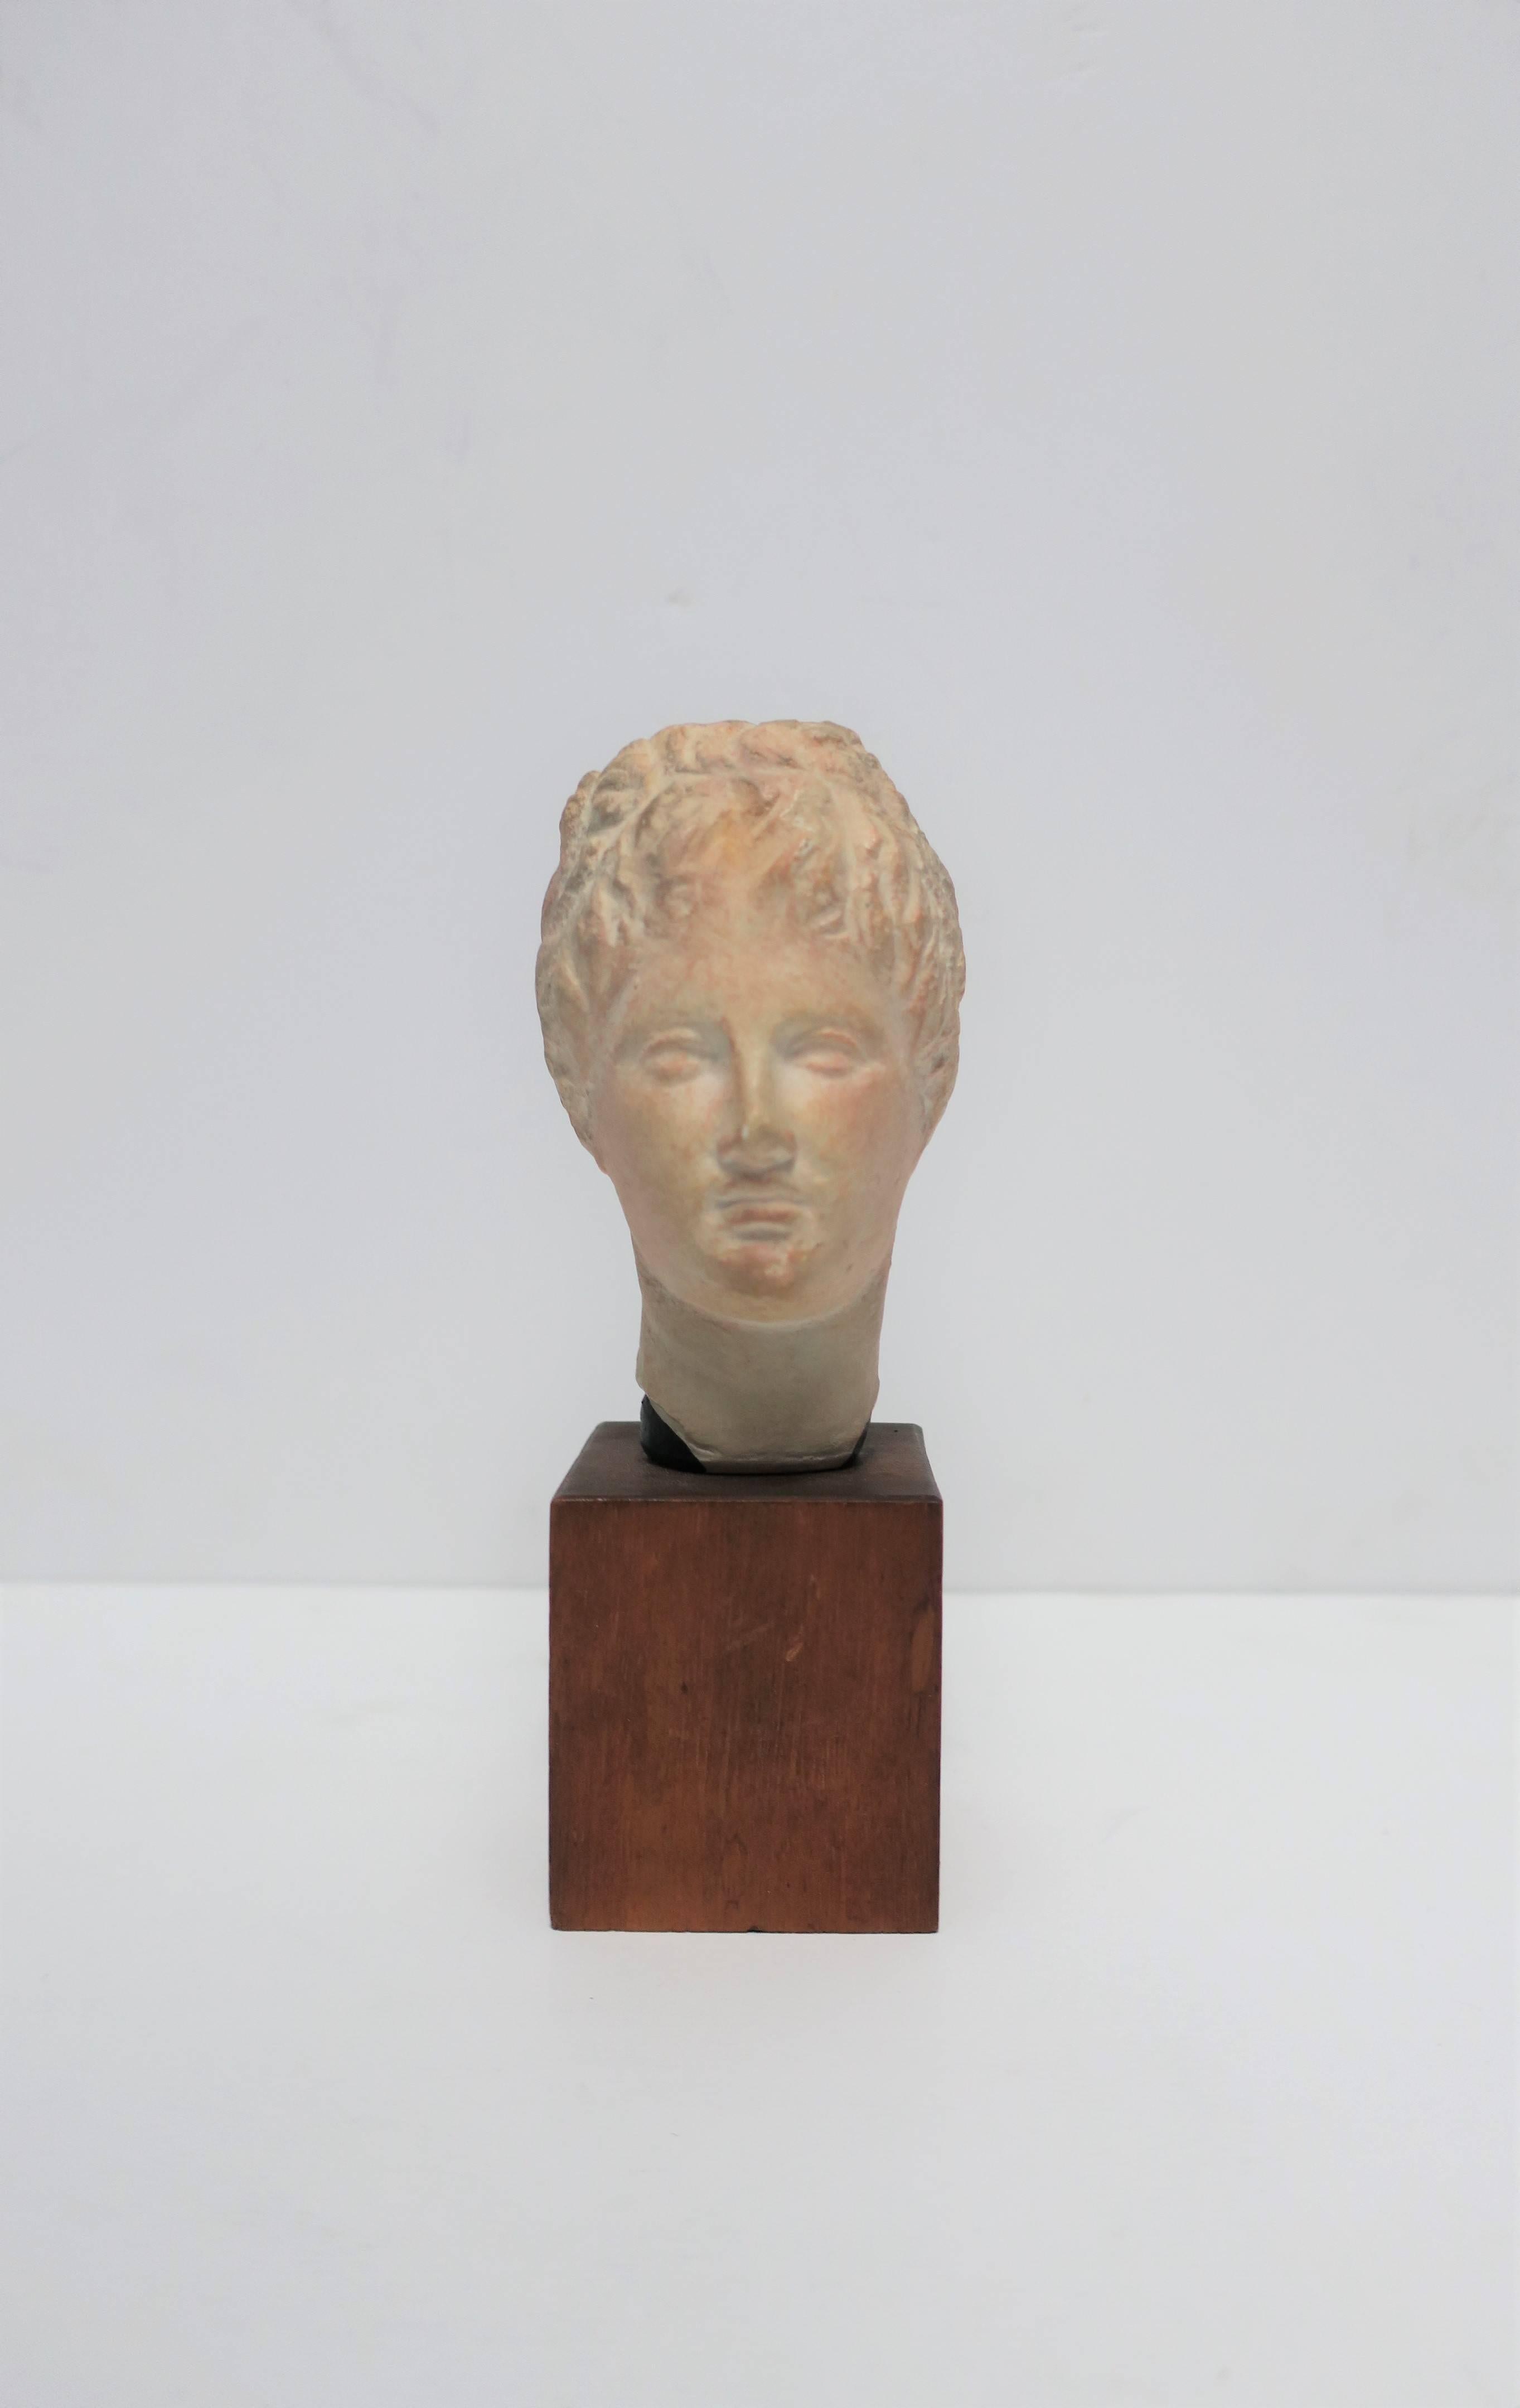 A small vintage English sculpture head or bust on wood base. This replica sculpture piece was made in England from an original featured at the Museum of Fine Arts, Boston MA (as reads on label, image #14.) 

Piece measures: 2.50